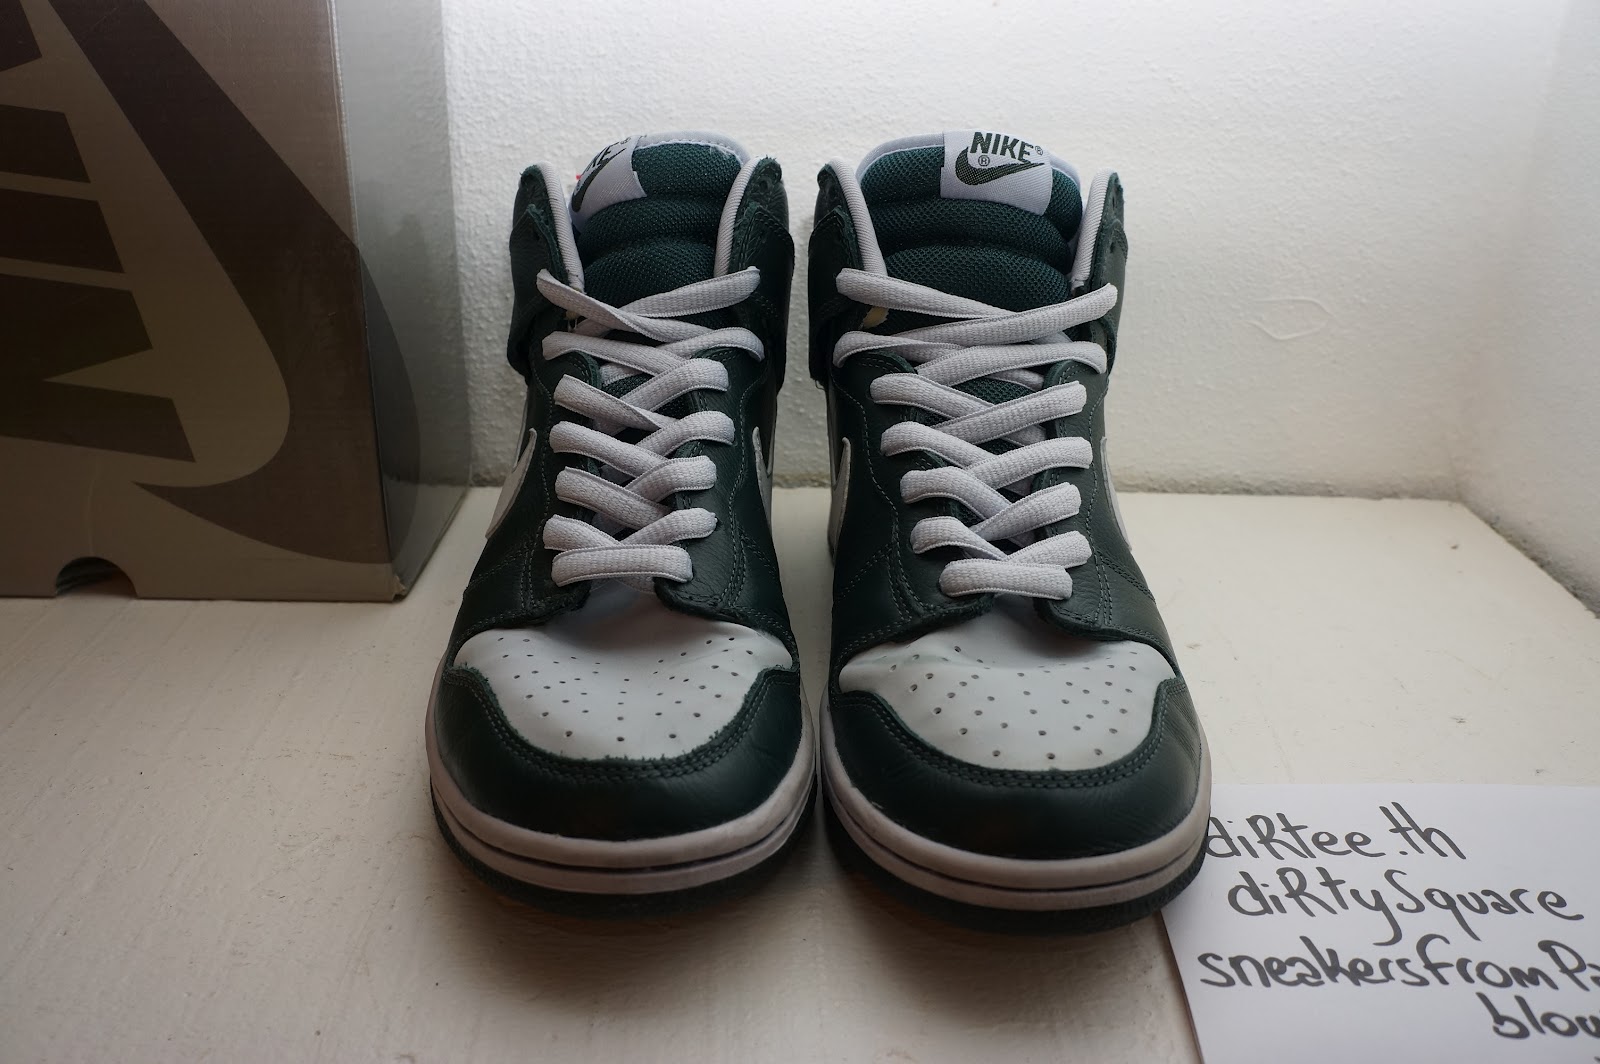 sneakers from Paris: NIKE SB - Dunk High Pro SB - Ghost Olive